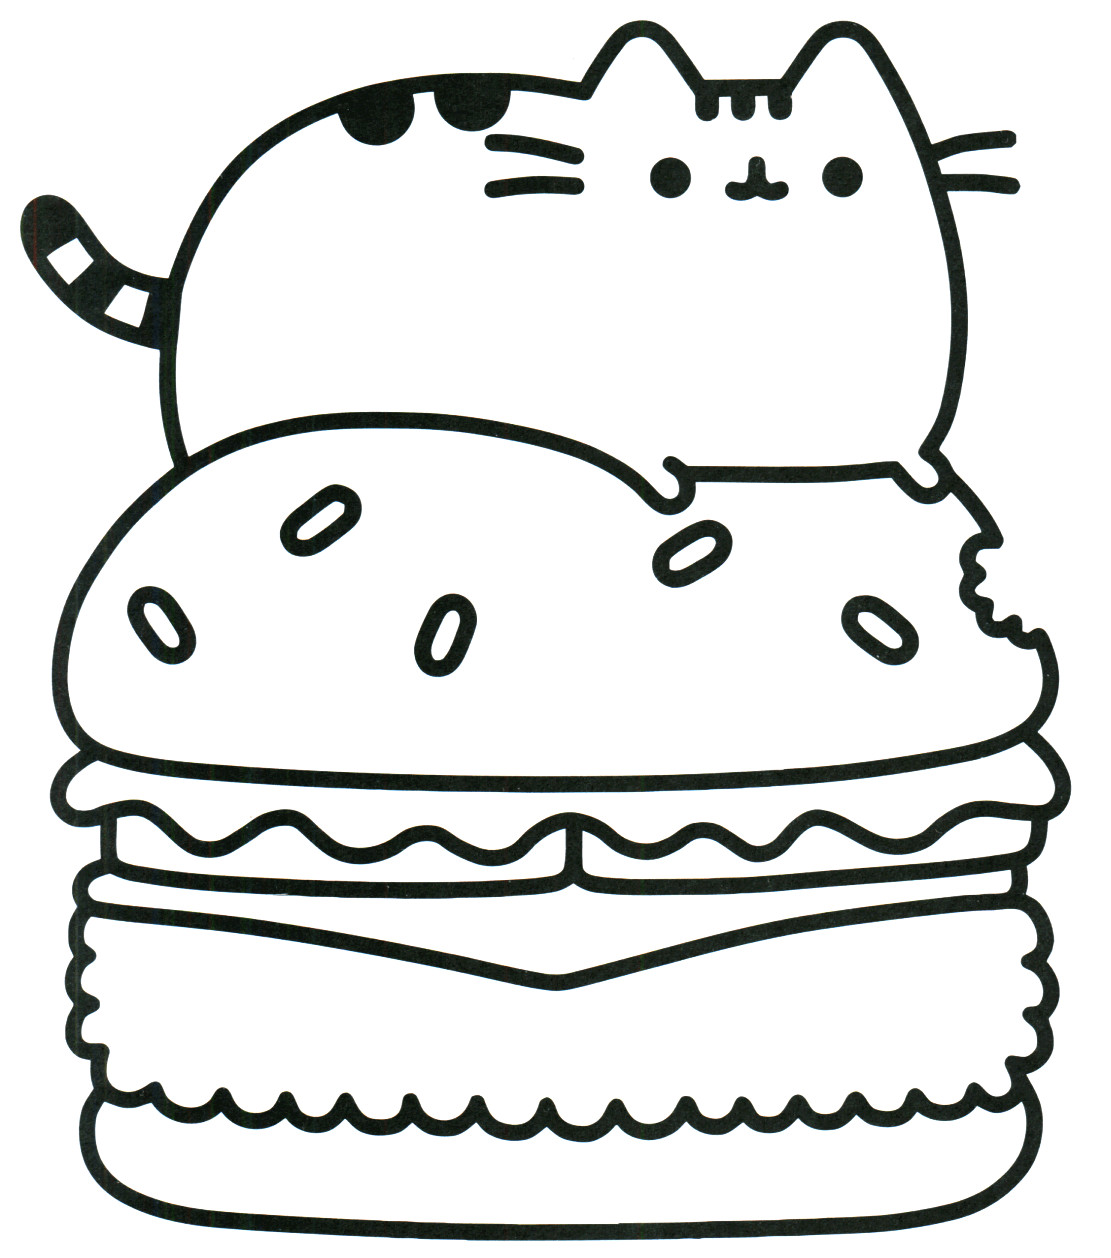 Pusheen Cat Coloring Pages at GetColorings.com | Free ...